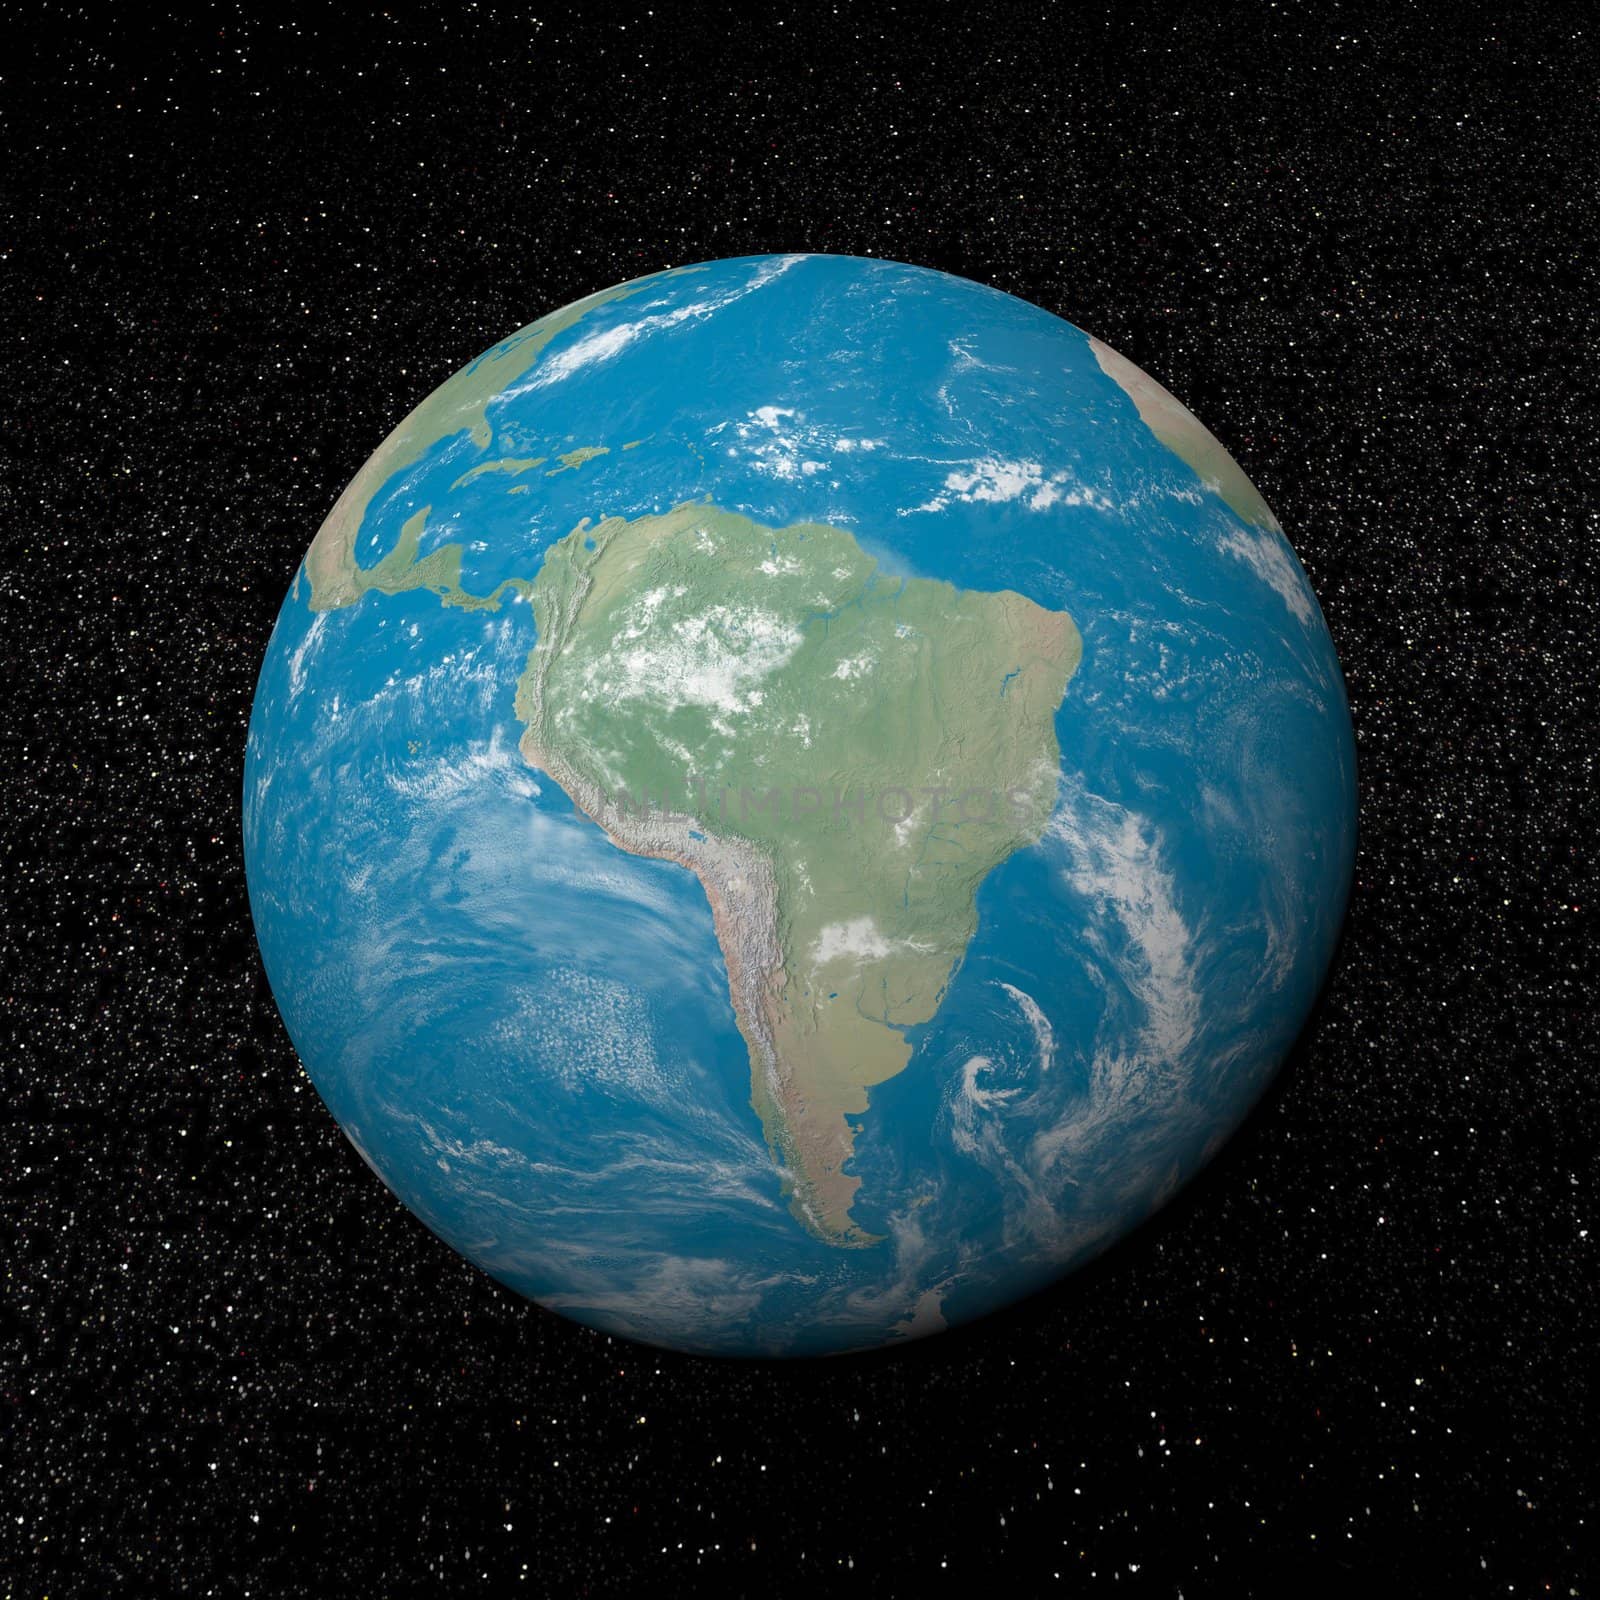 South america on earth and universe background with stars - 3D render